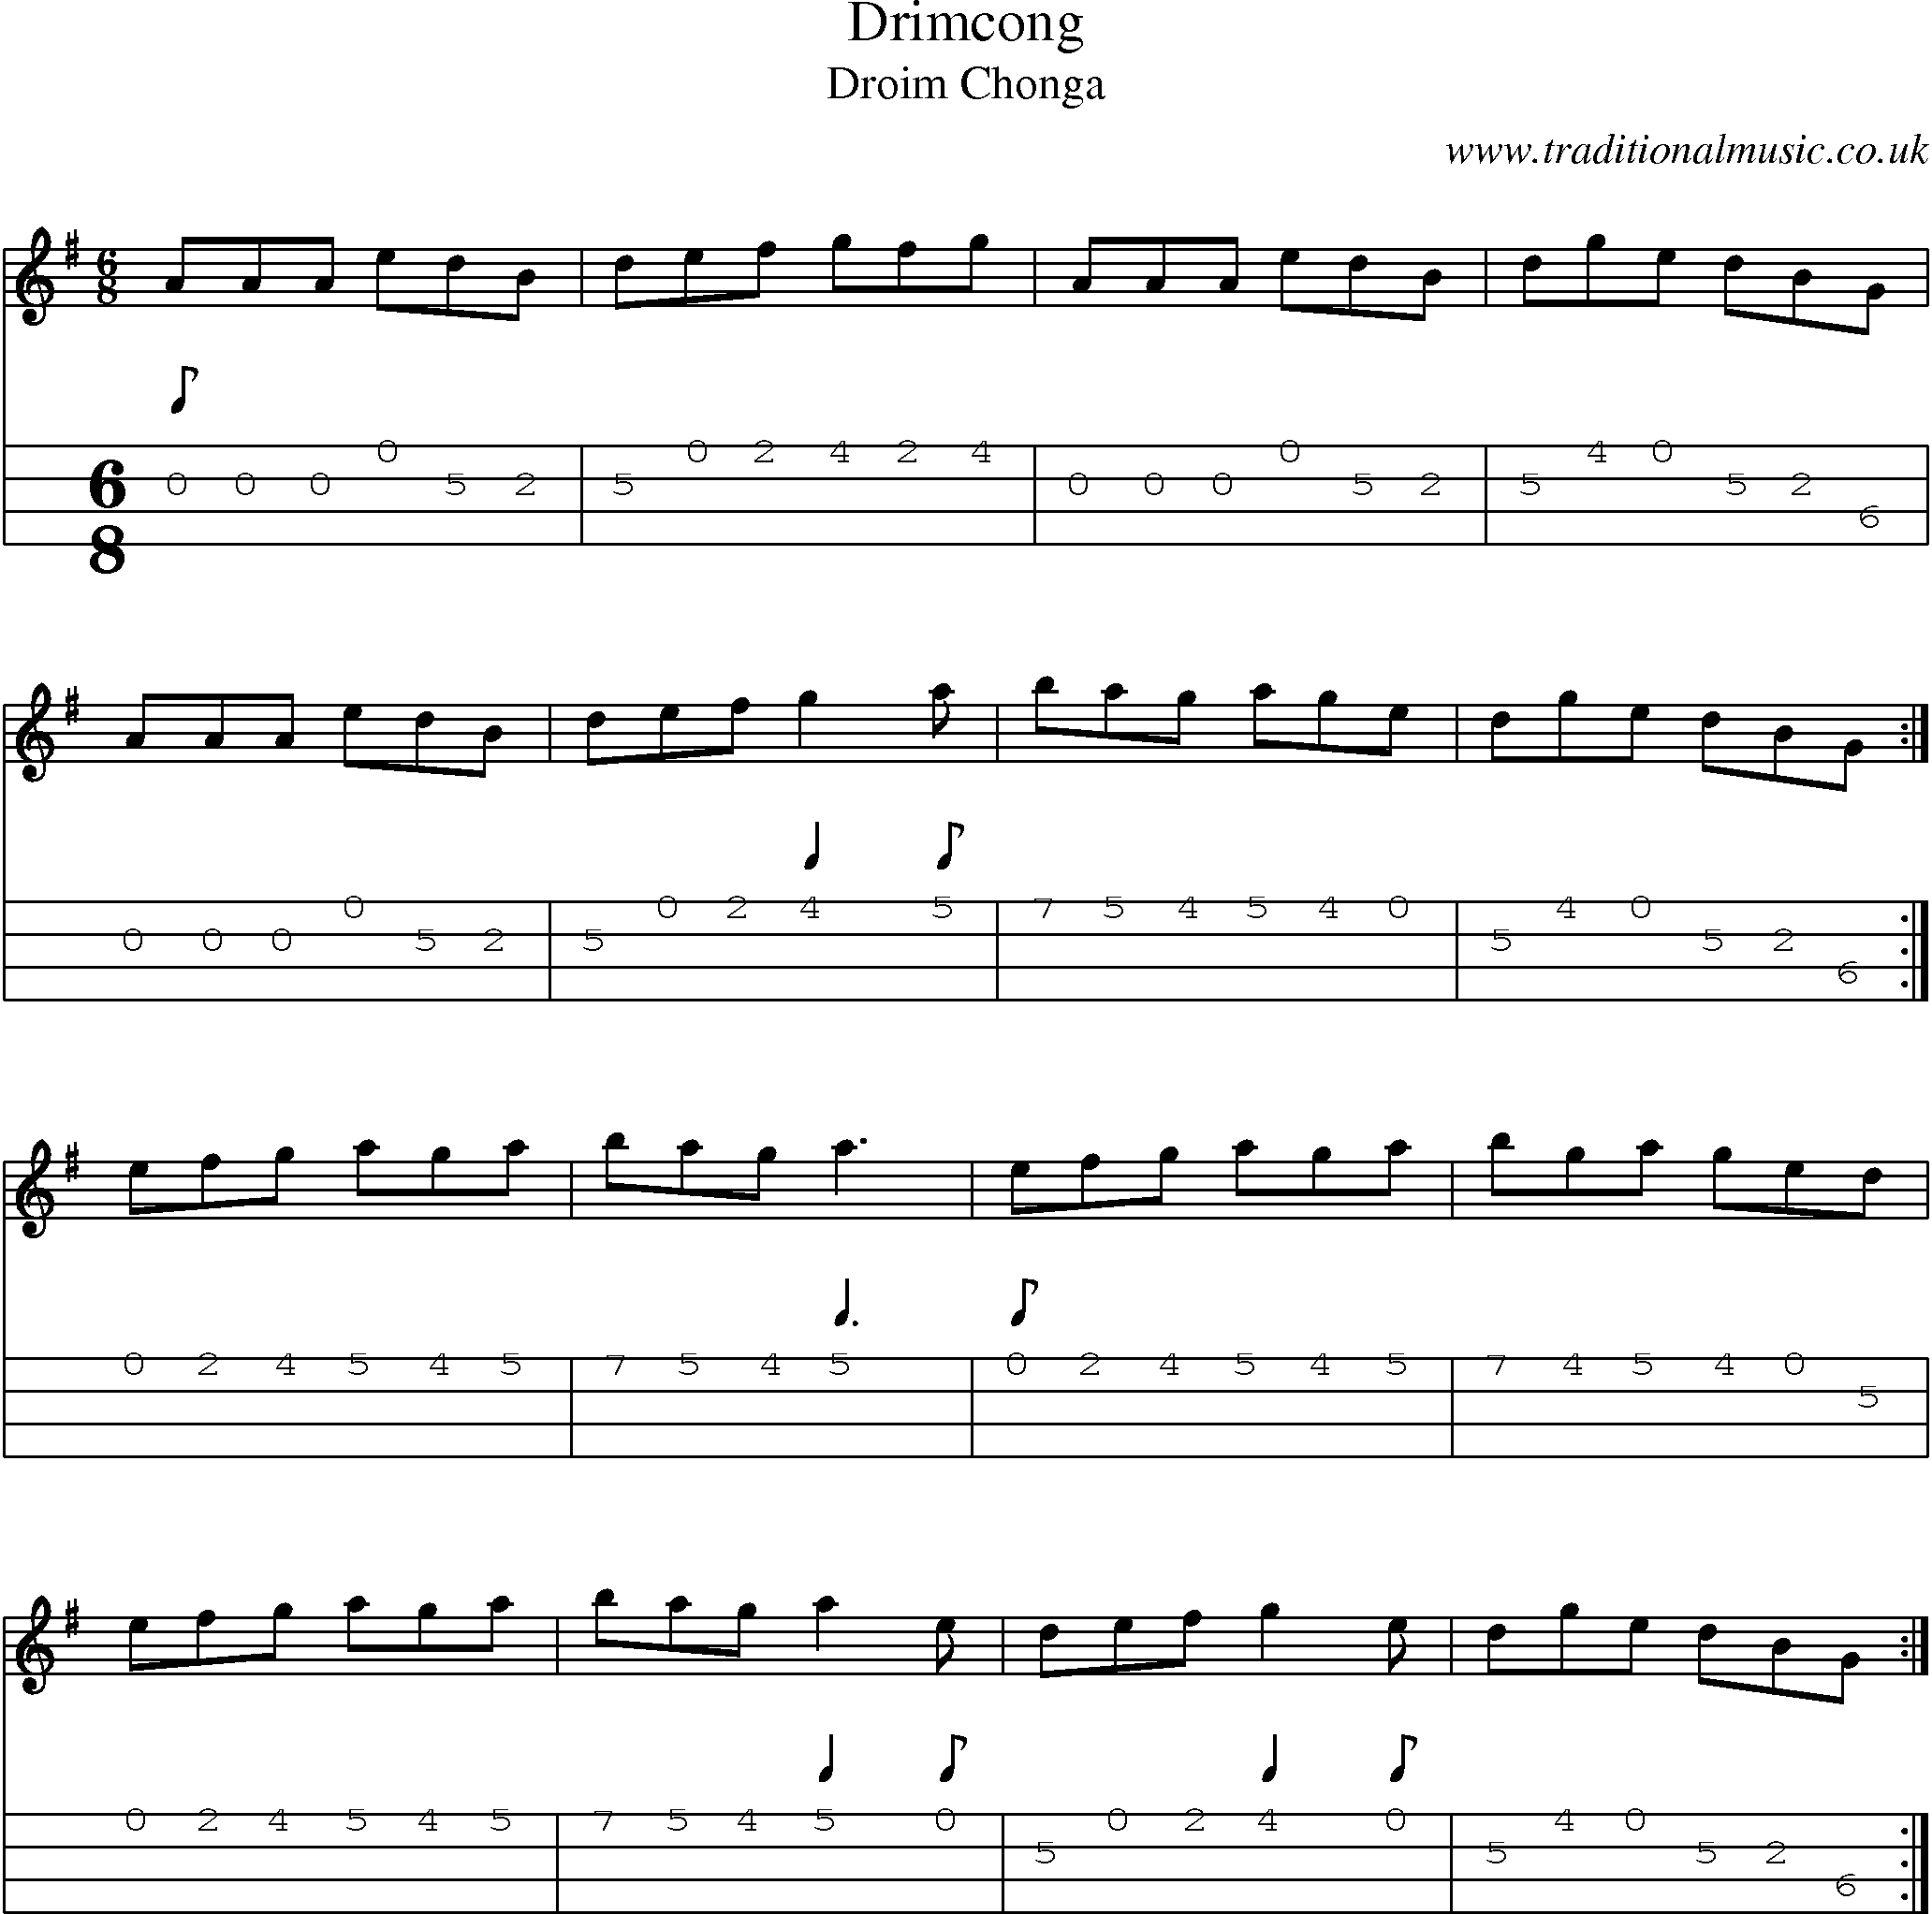 Music Score and Mandolin Tabs for Drimcong